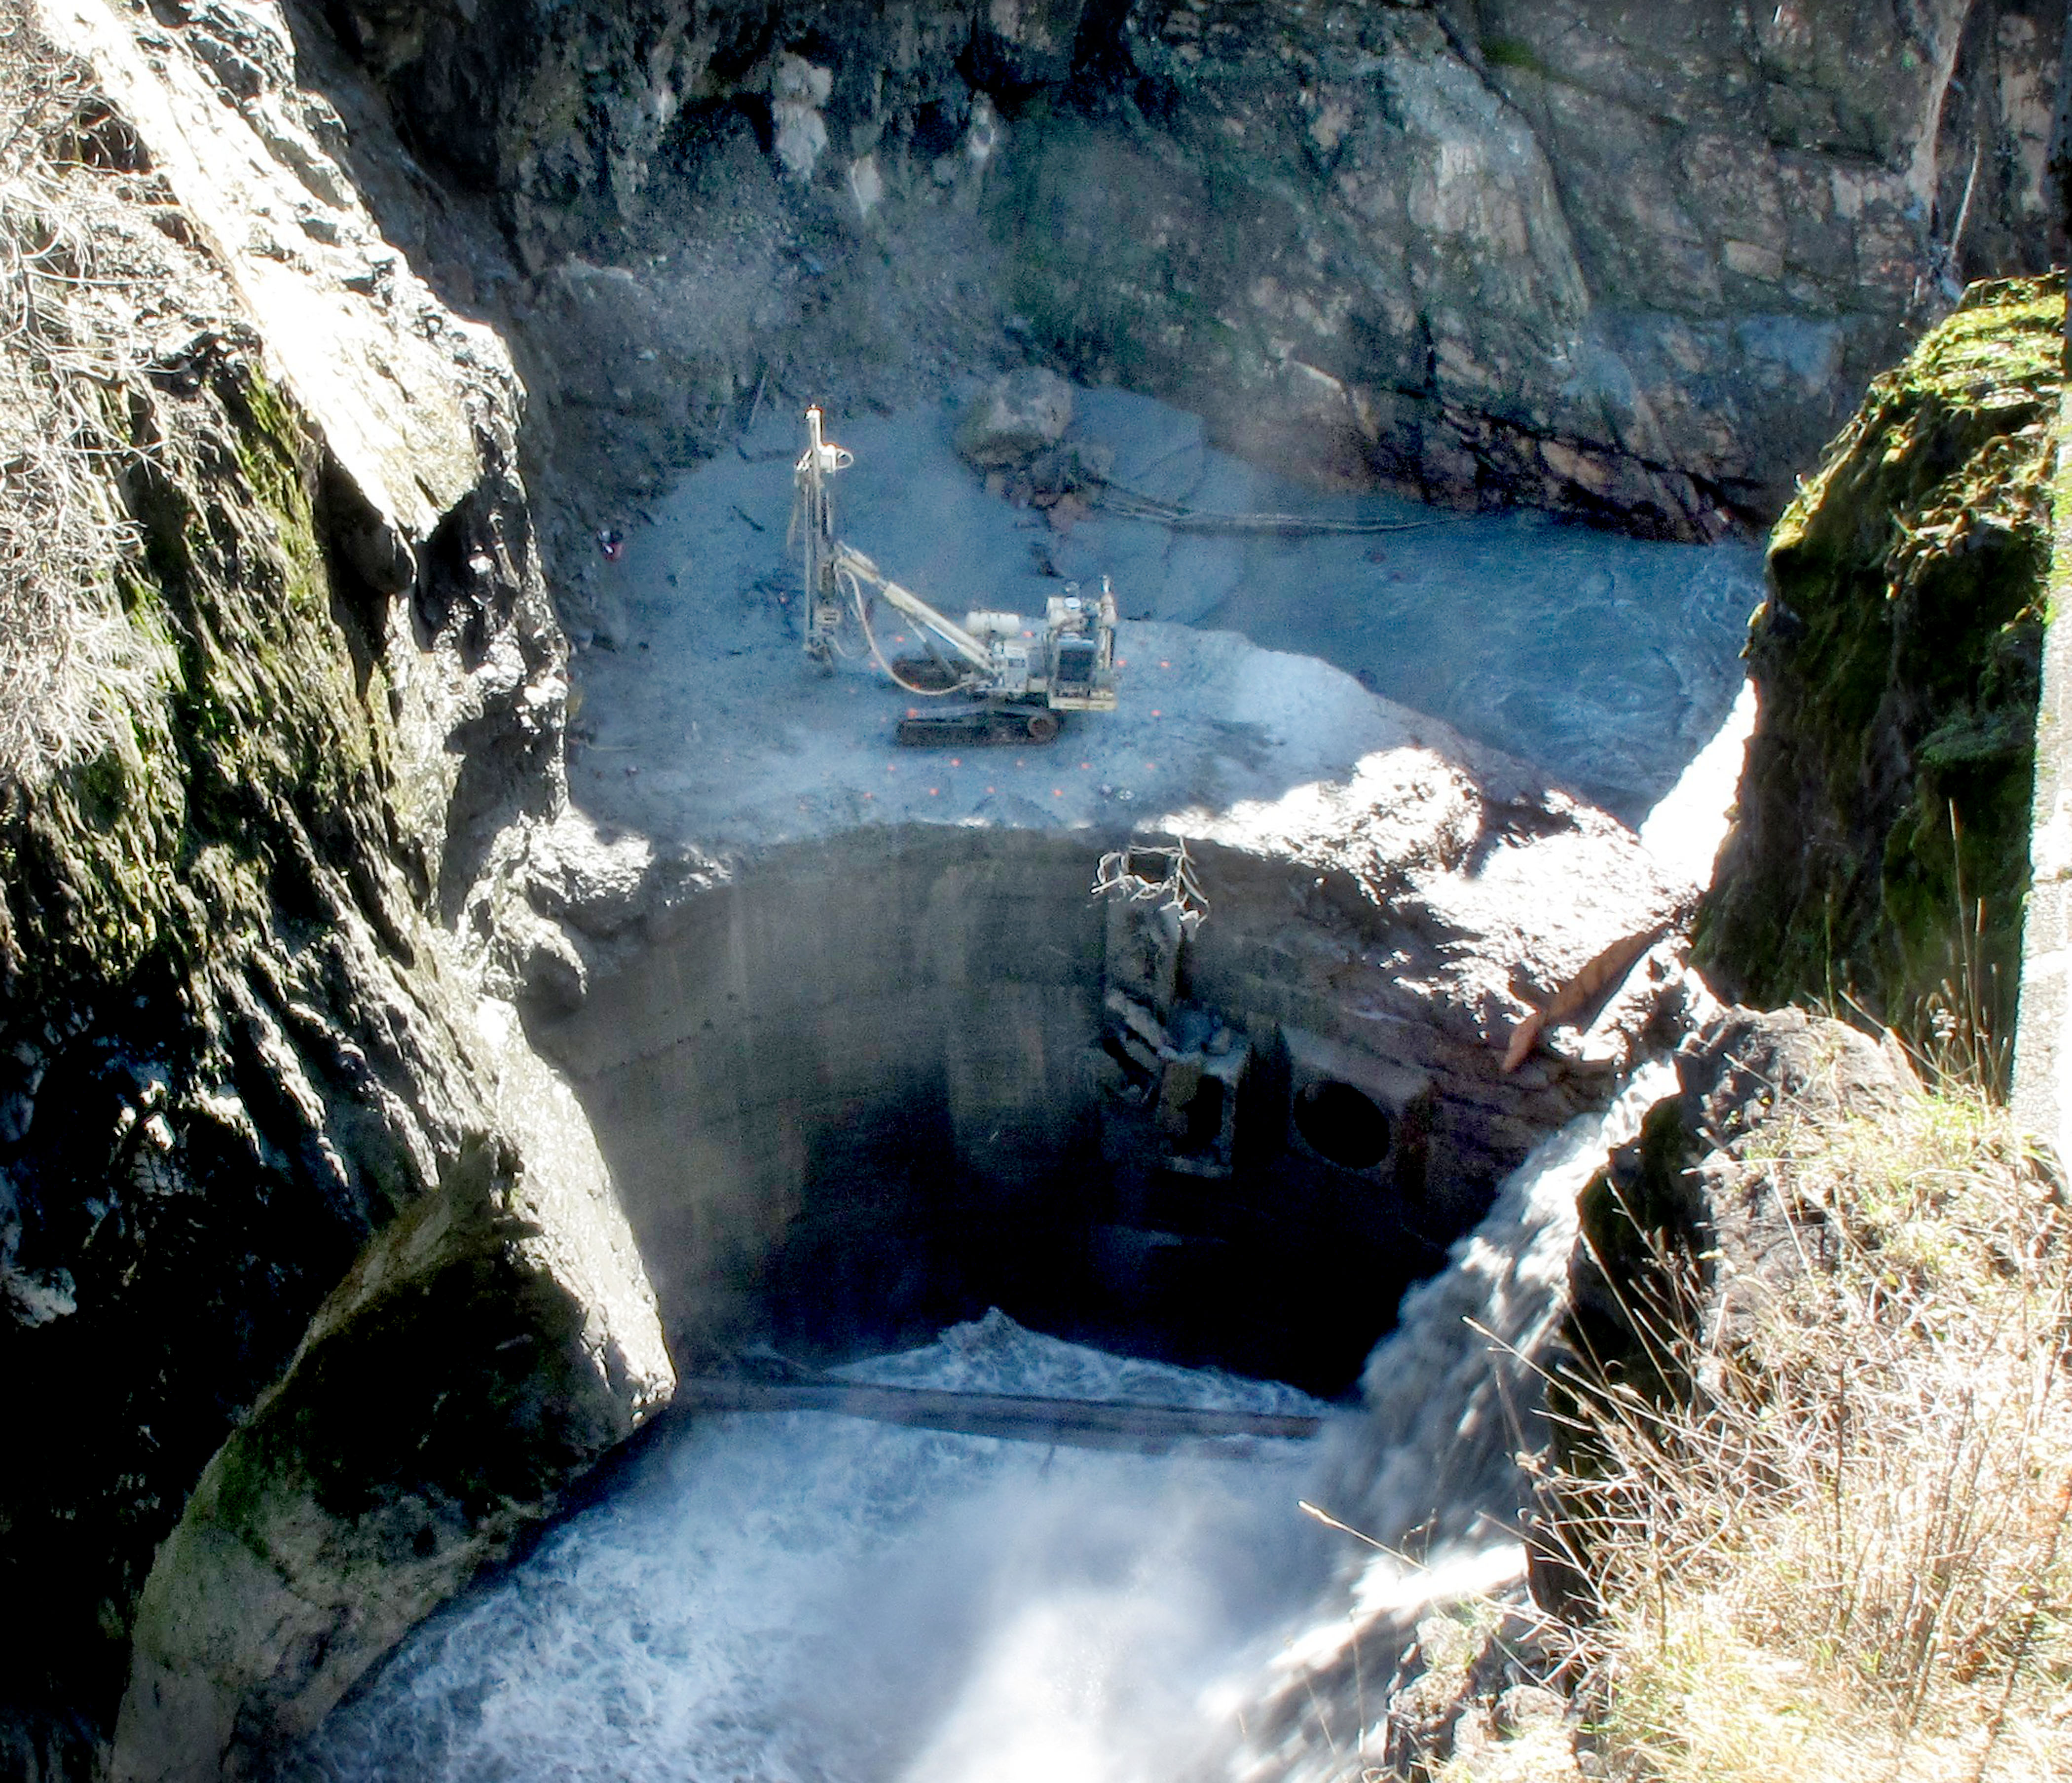 This Olympic National Park webcam photo shows equipment atop the remaining portion of Glines Canyon Dam